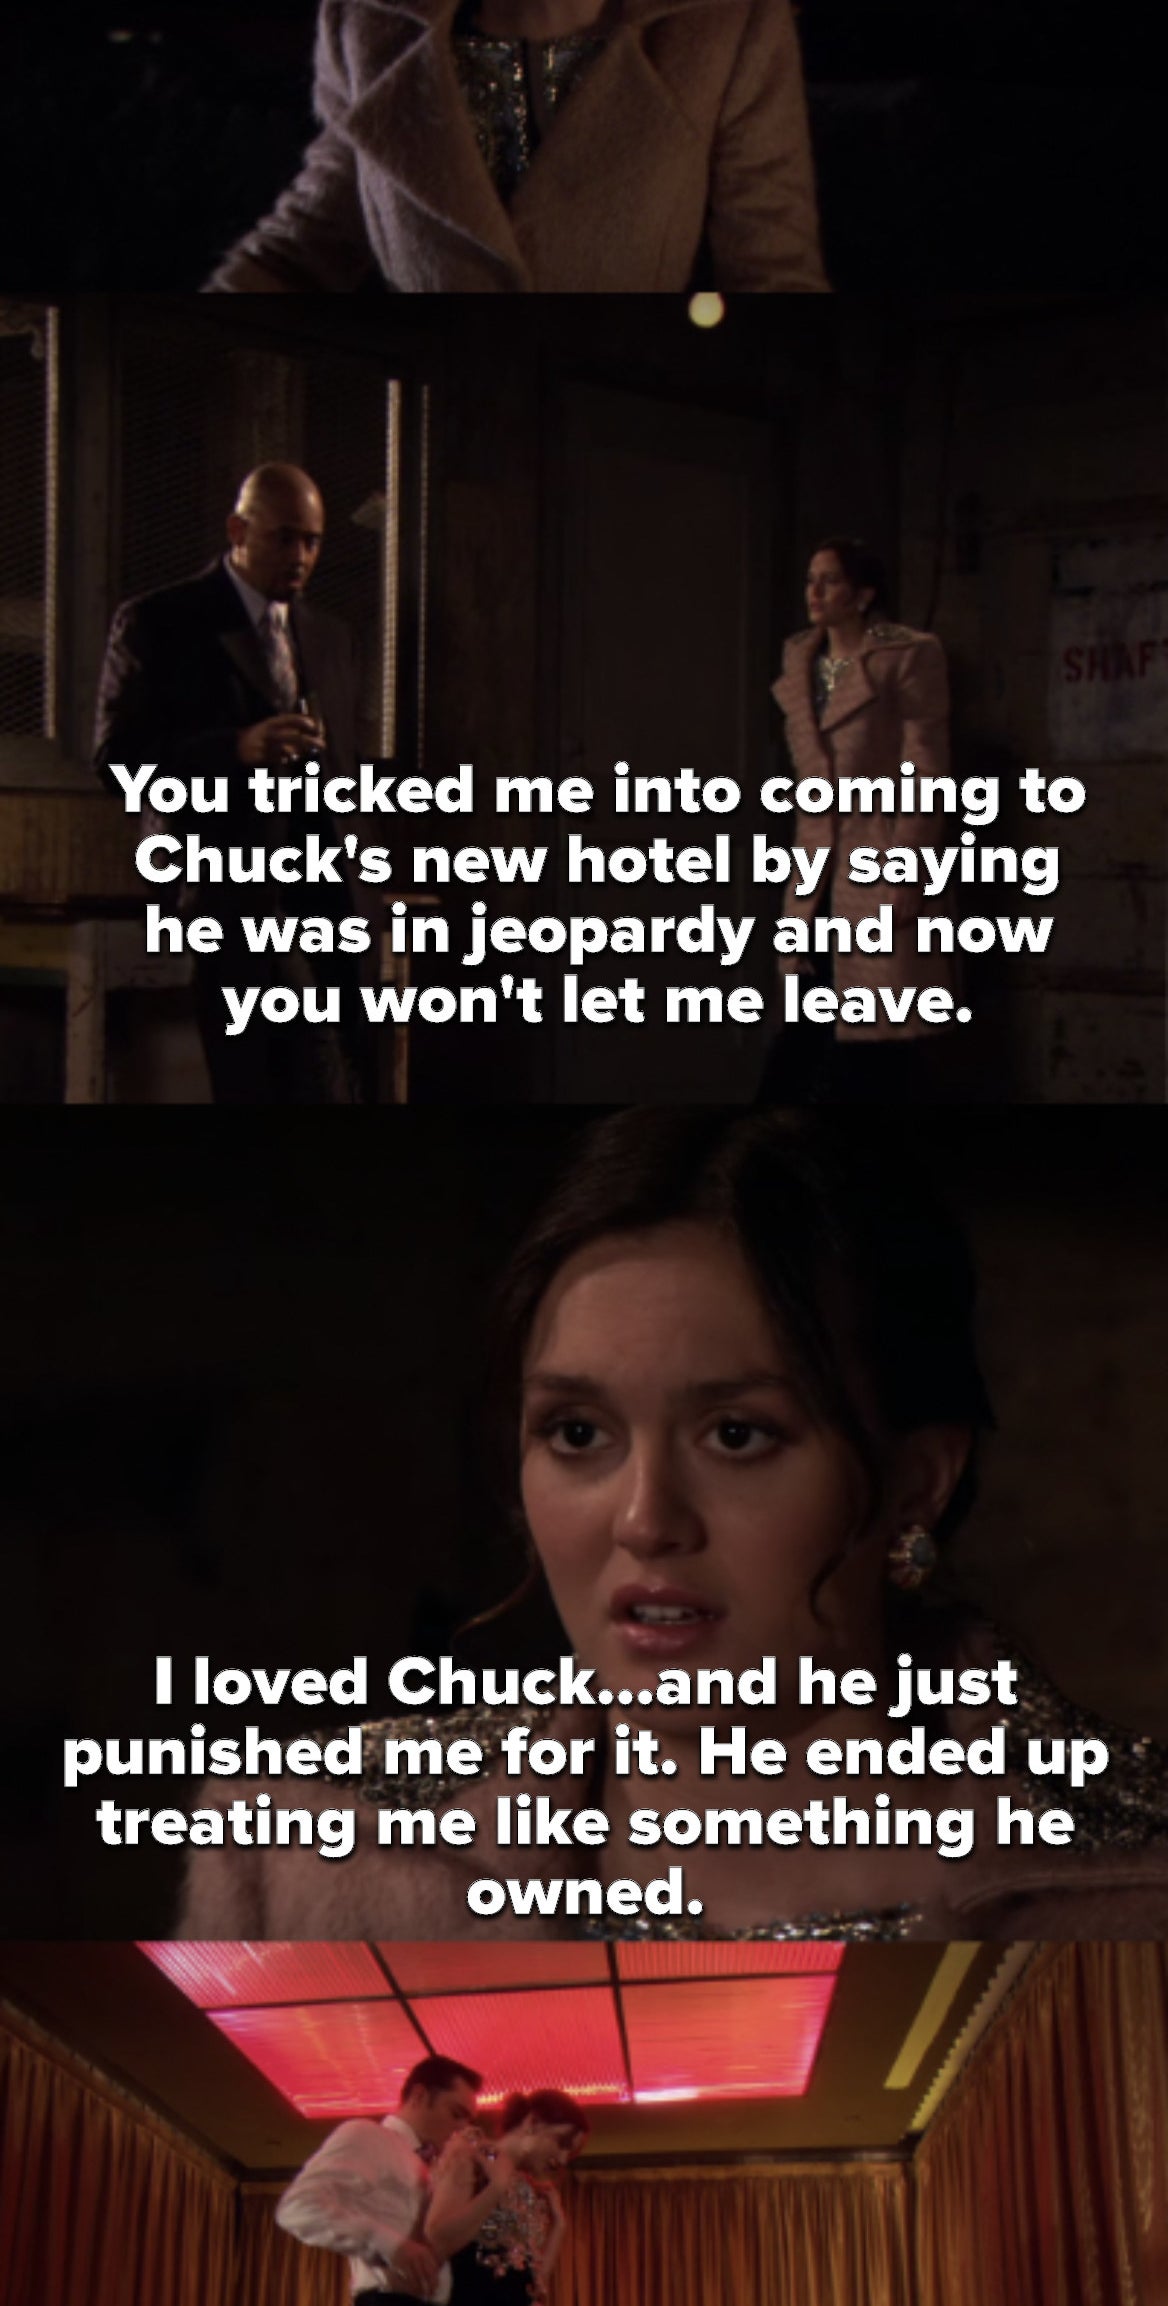 Blair explains that Russel tricked her into coming to Chuck&#x27;s hotel by saying he was in danger and now he won&#x27;t let her leave, and tries to convince him that she understands how he feels because Chuck was awful to her too. Then they sleep together